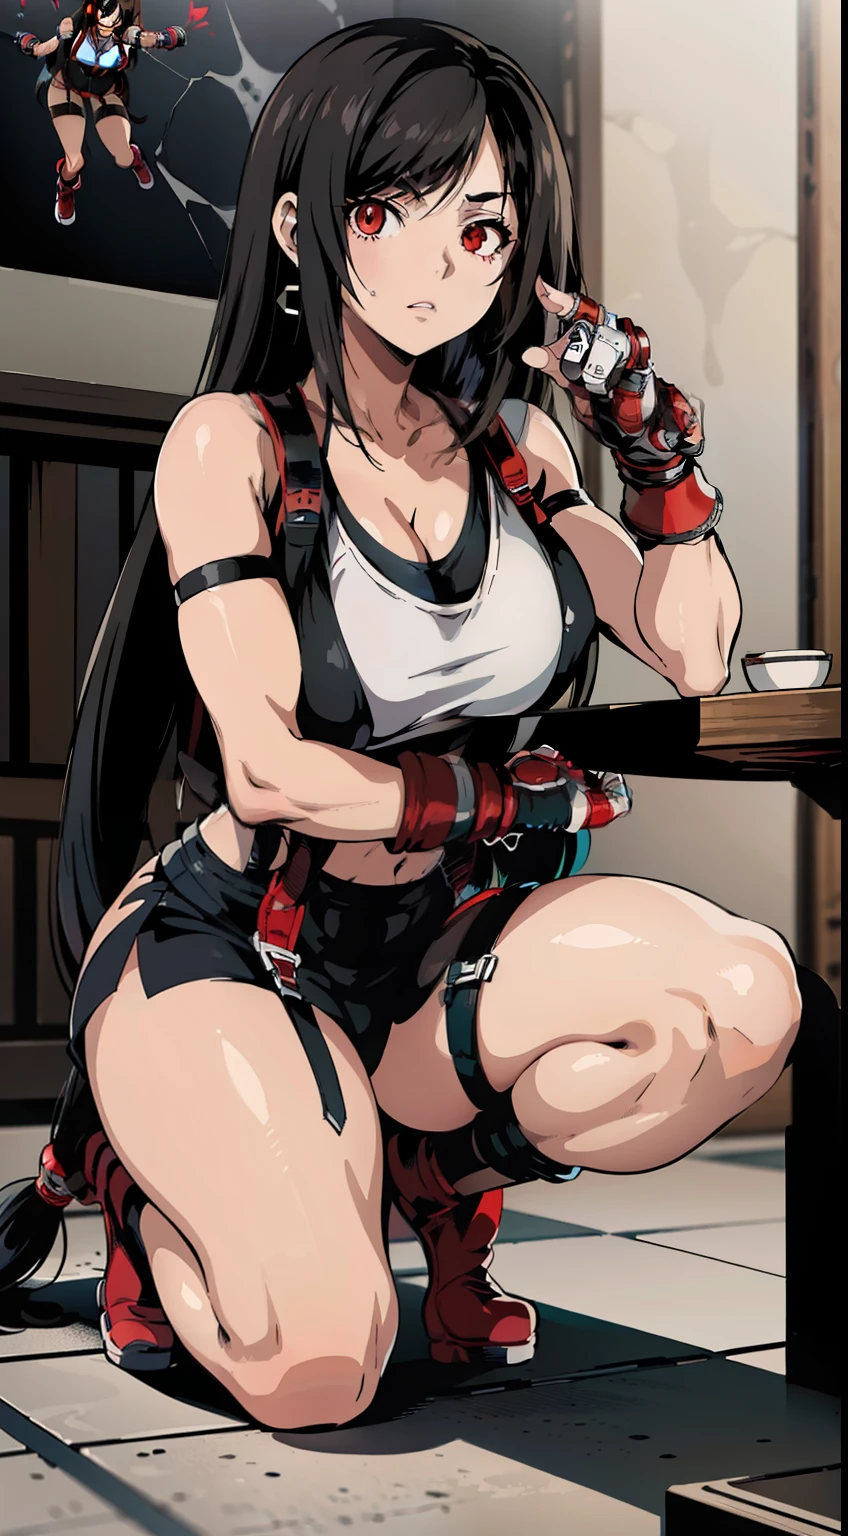 (Anime) . ((((Tifa Lockhart)))), red eyes, full body, indoors . (Masterpiece: 1.8), k quality, final fantasy artwork concept, detailed manga eyes, detailed hair, detailed clothes, detailed body, sharper drawings, pronounced detailed face, shiny objects like jewelry, see the creases on the clothes, more consistent clothes, more rounded eyes, globular transparent liquid eyes, more colors, more consistent clothes , correct clothing features, better eye line, better shoulders, really colorful, coarser line, black line, finishing. (drowing (anime (manga (comics)))) (coarser stroke: 1.8) (black stroke: 1.8) (color: 1.8) (clean: 1.8) (color contrast: 1.8) (black outline: 1.8) (adjusted color contrast: 1.8) (shadow play: 1.8) (manga eyes: 1.8) (muscle: 1.5 ) (rendering homogeneous: 1. 3)